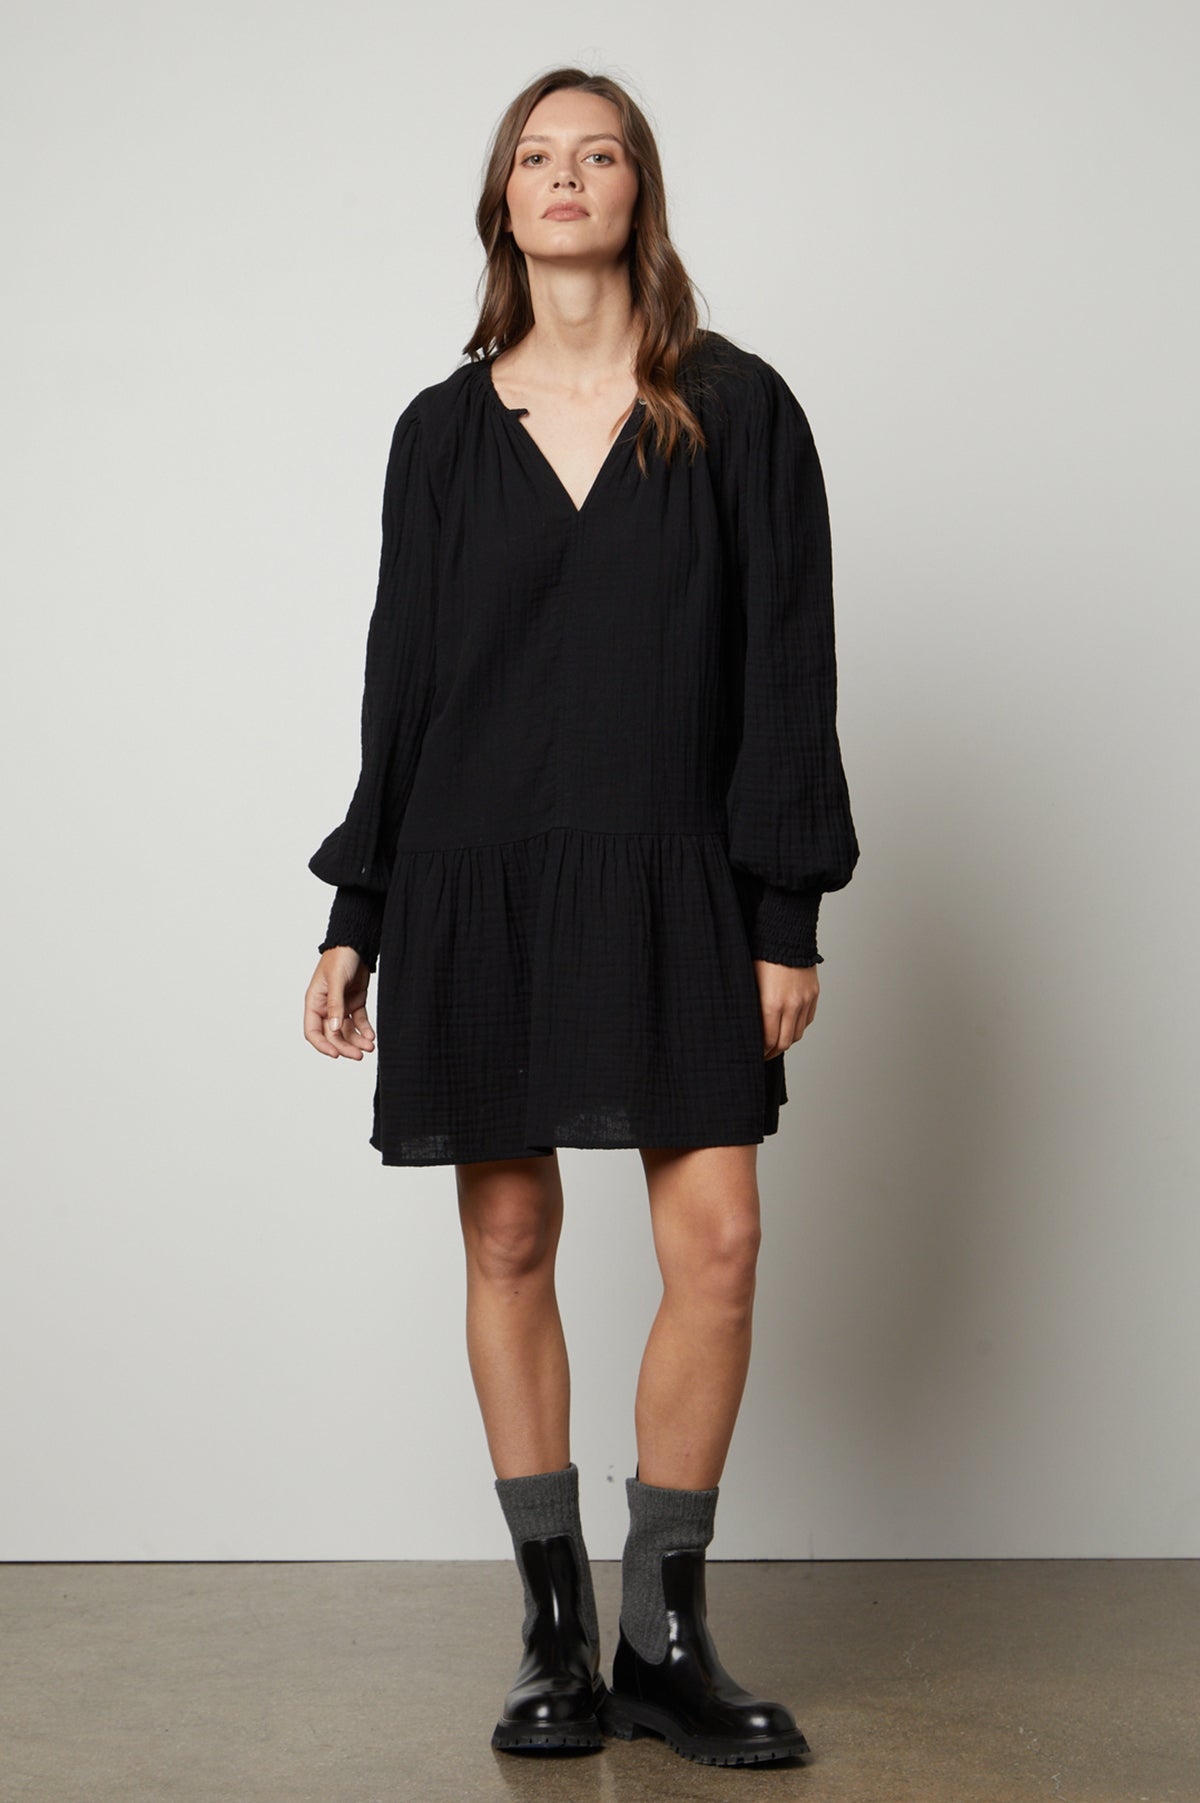   A model wears the VIVIANA COTTON GAUZE DRESS by Velvet by Graham & Spencer, which features a ruffled hem. 